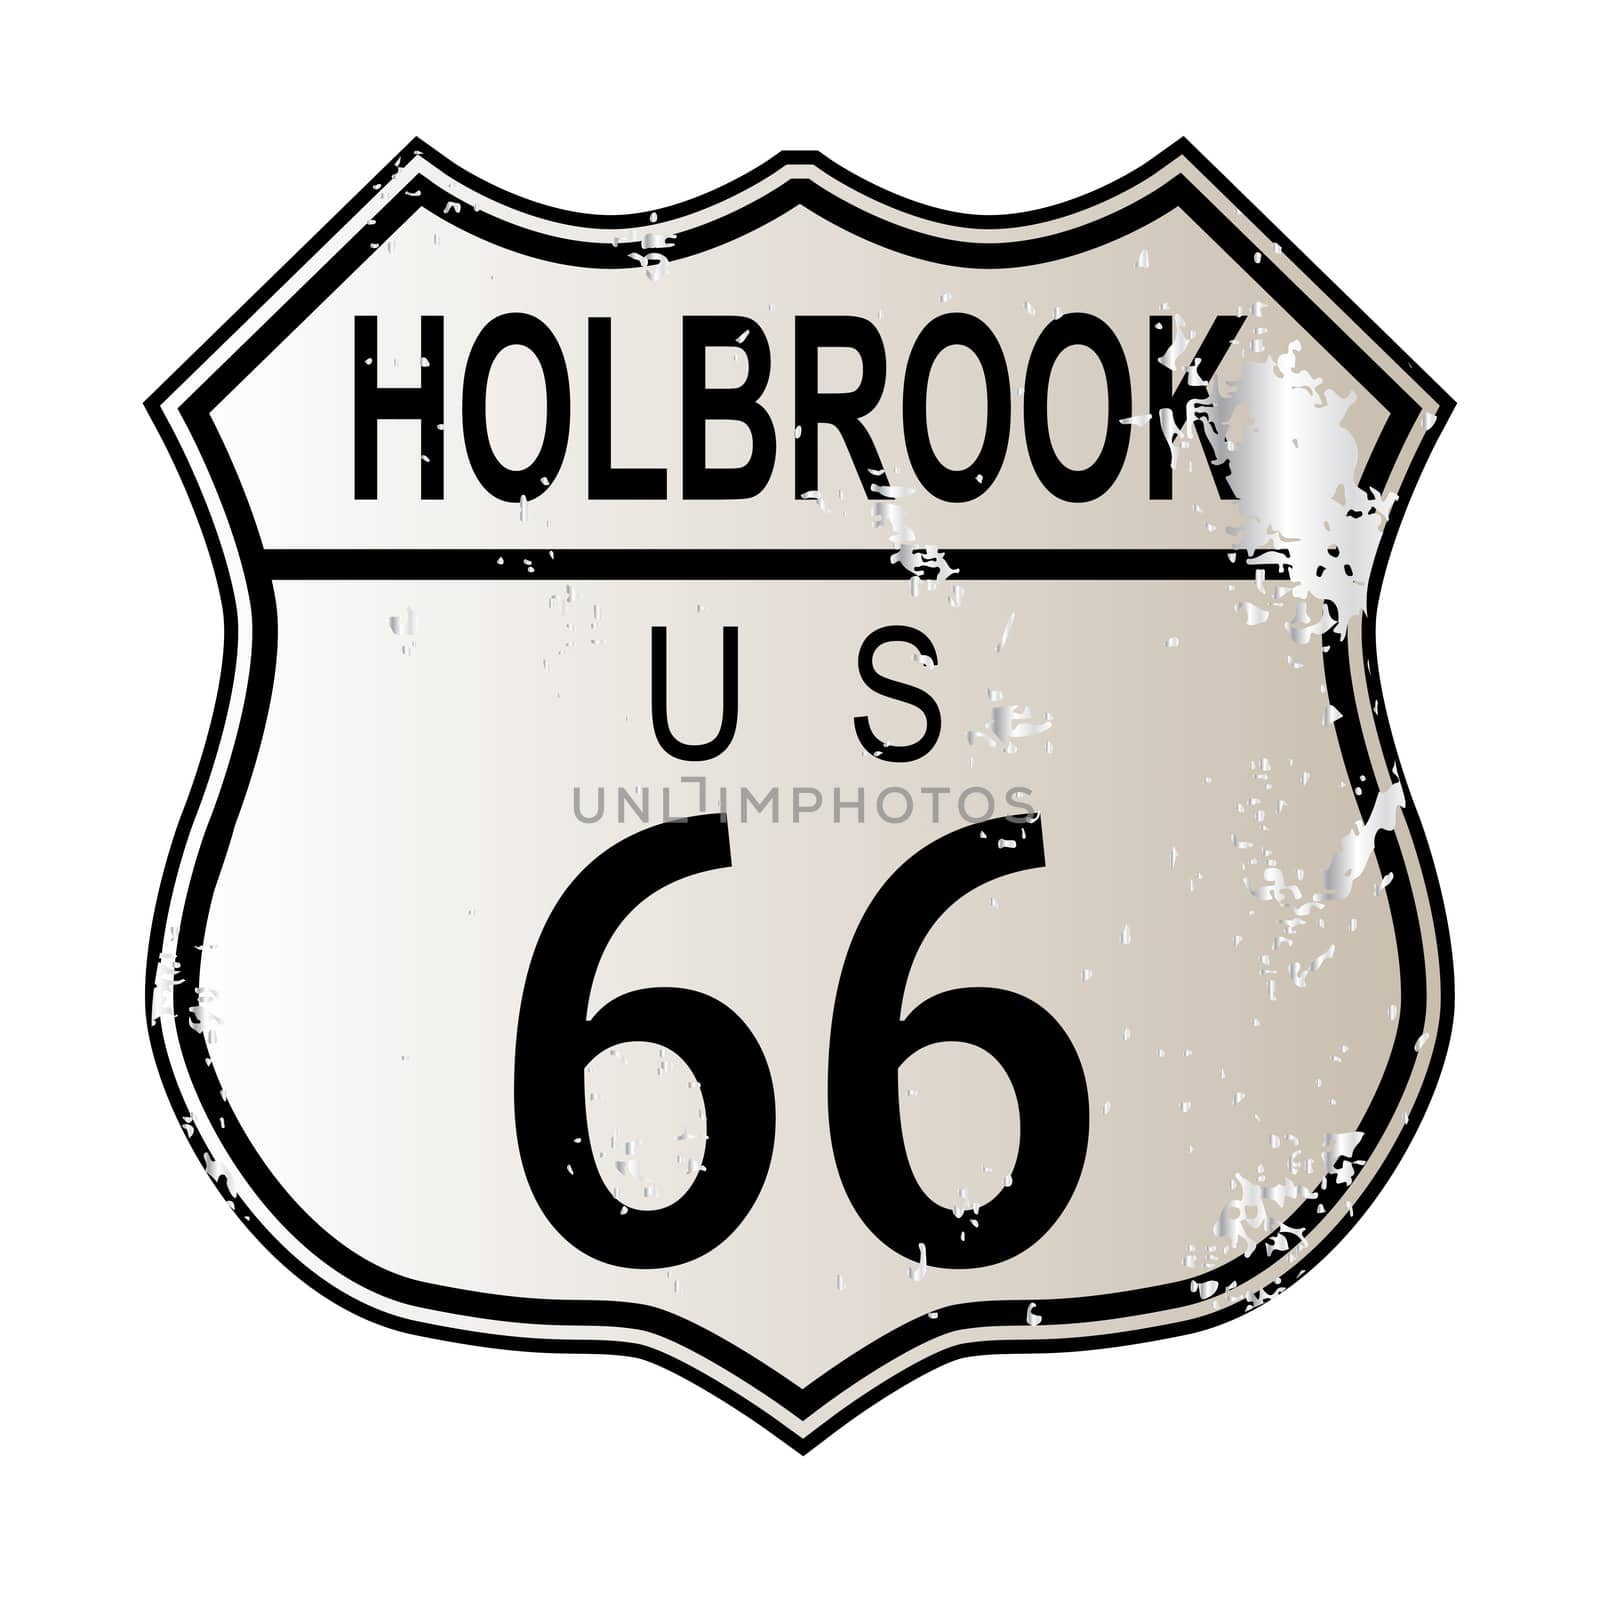 Holbrook Route 66 traffic sign over a white background and the legend ROUTE US 66